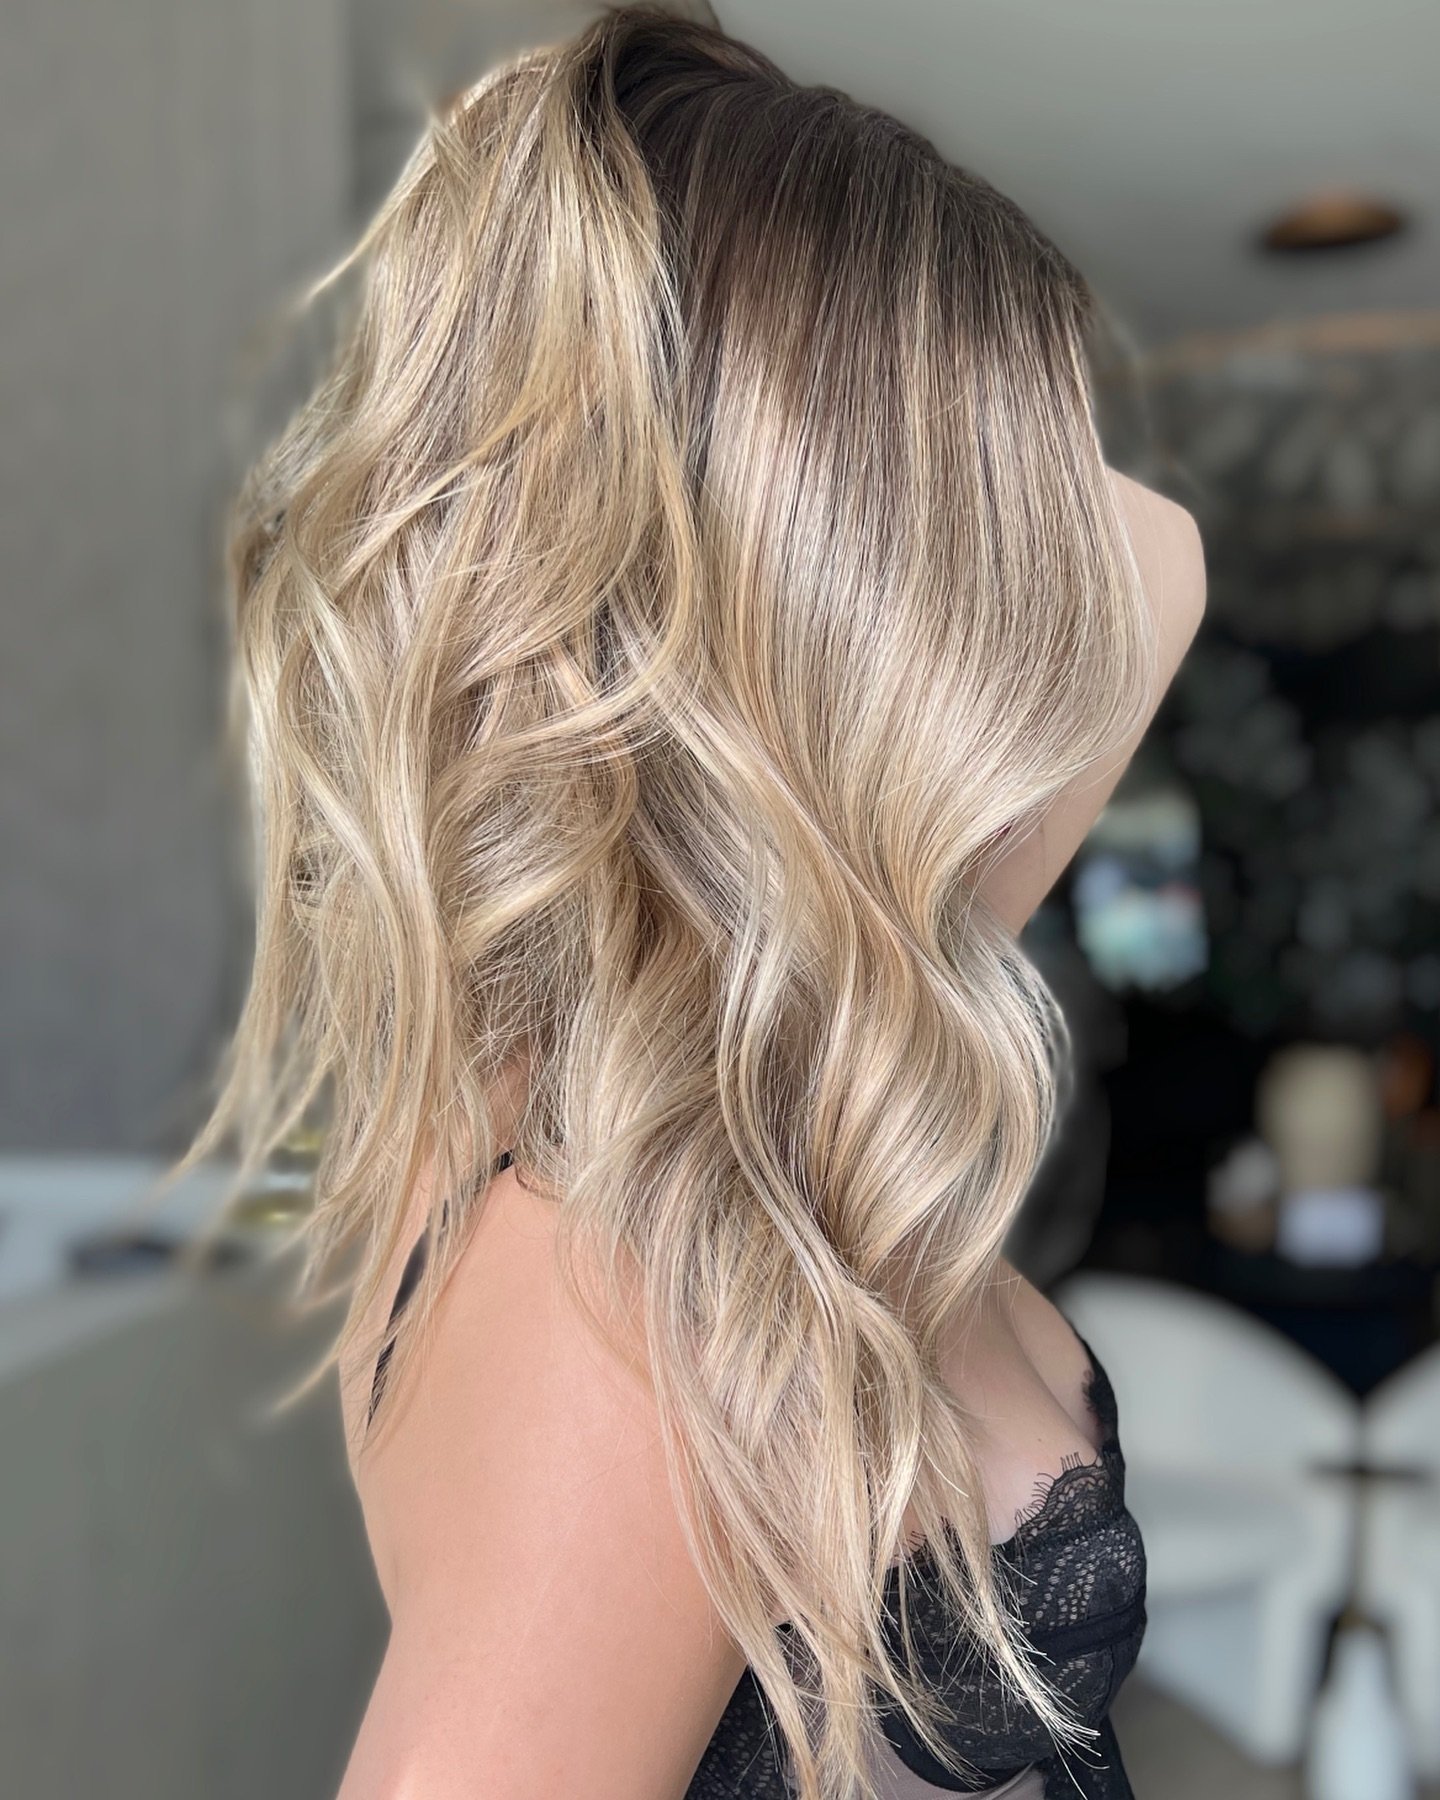 the color melt gets us every time // blended with @redkenpro shades EQ gloss💧@thebeigelabelsalon
⠀ 
Co-colored by @kaaalayage &amp; @xo.farhana.balayage for @redkenpro